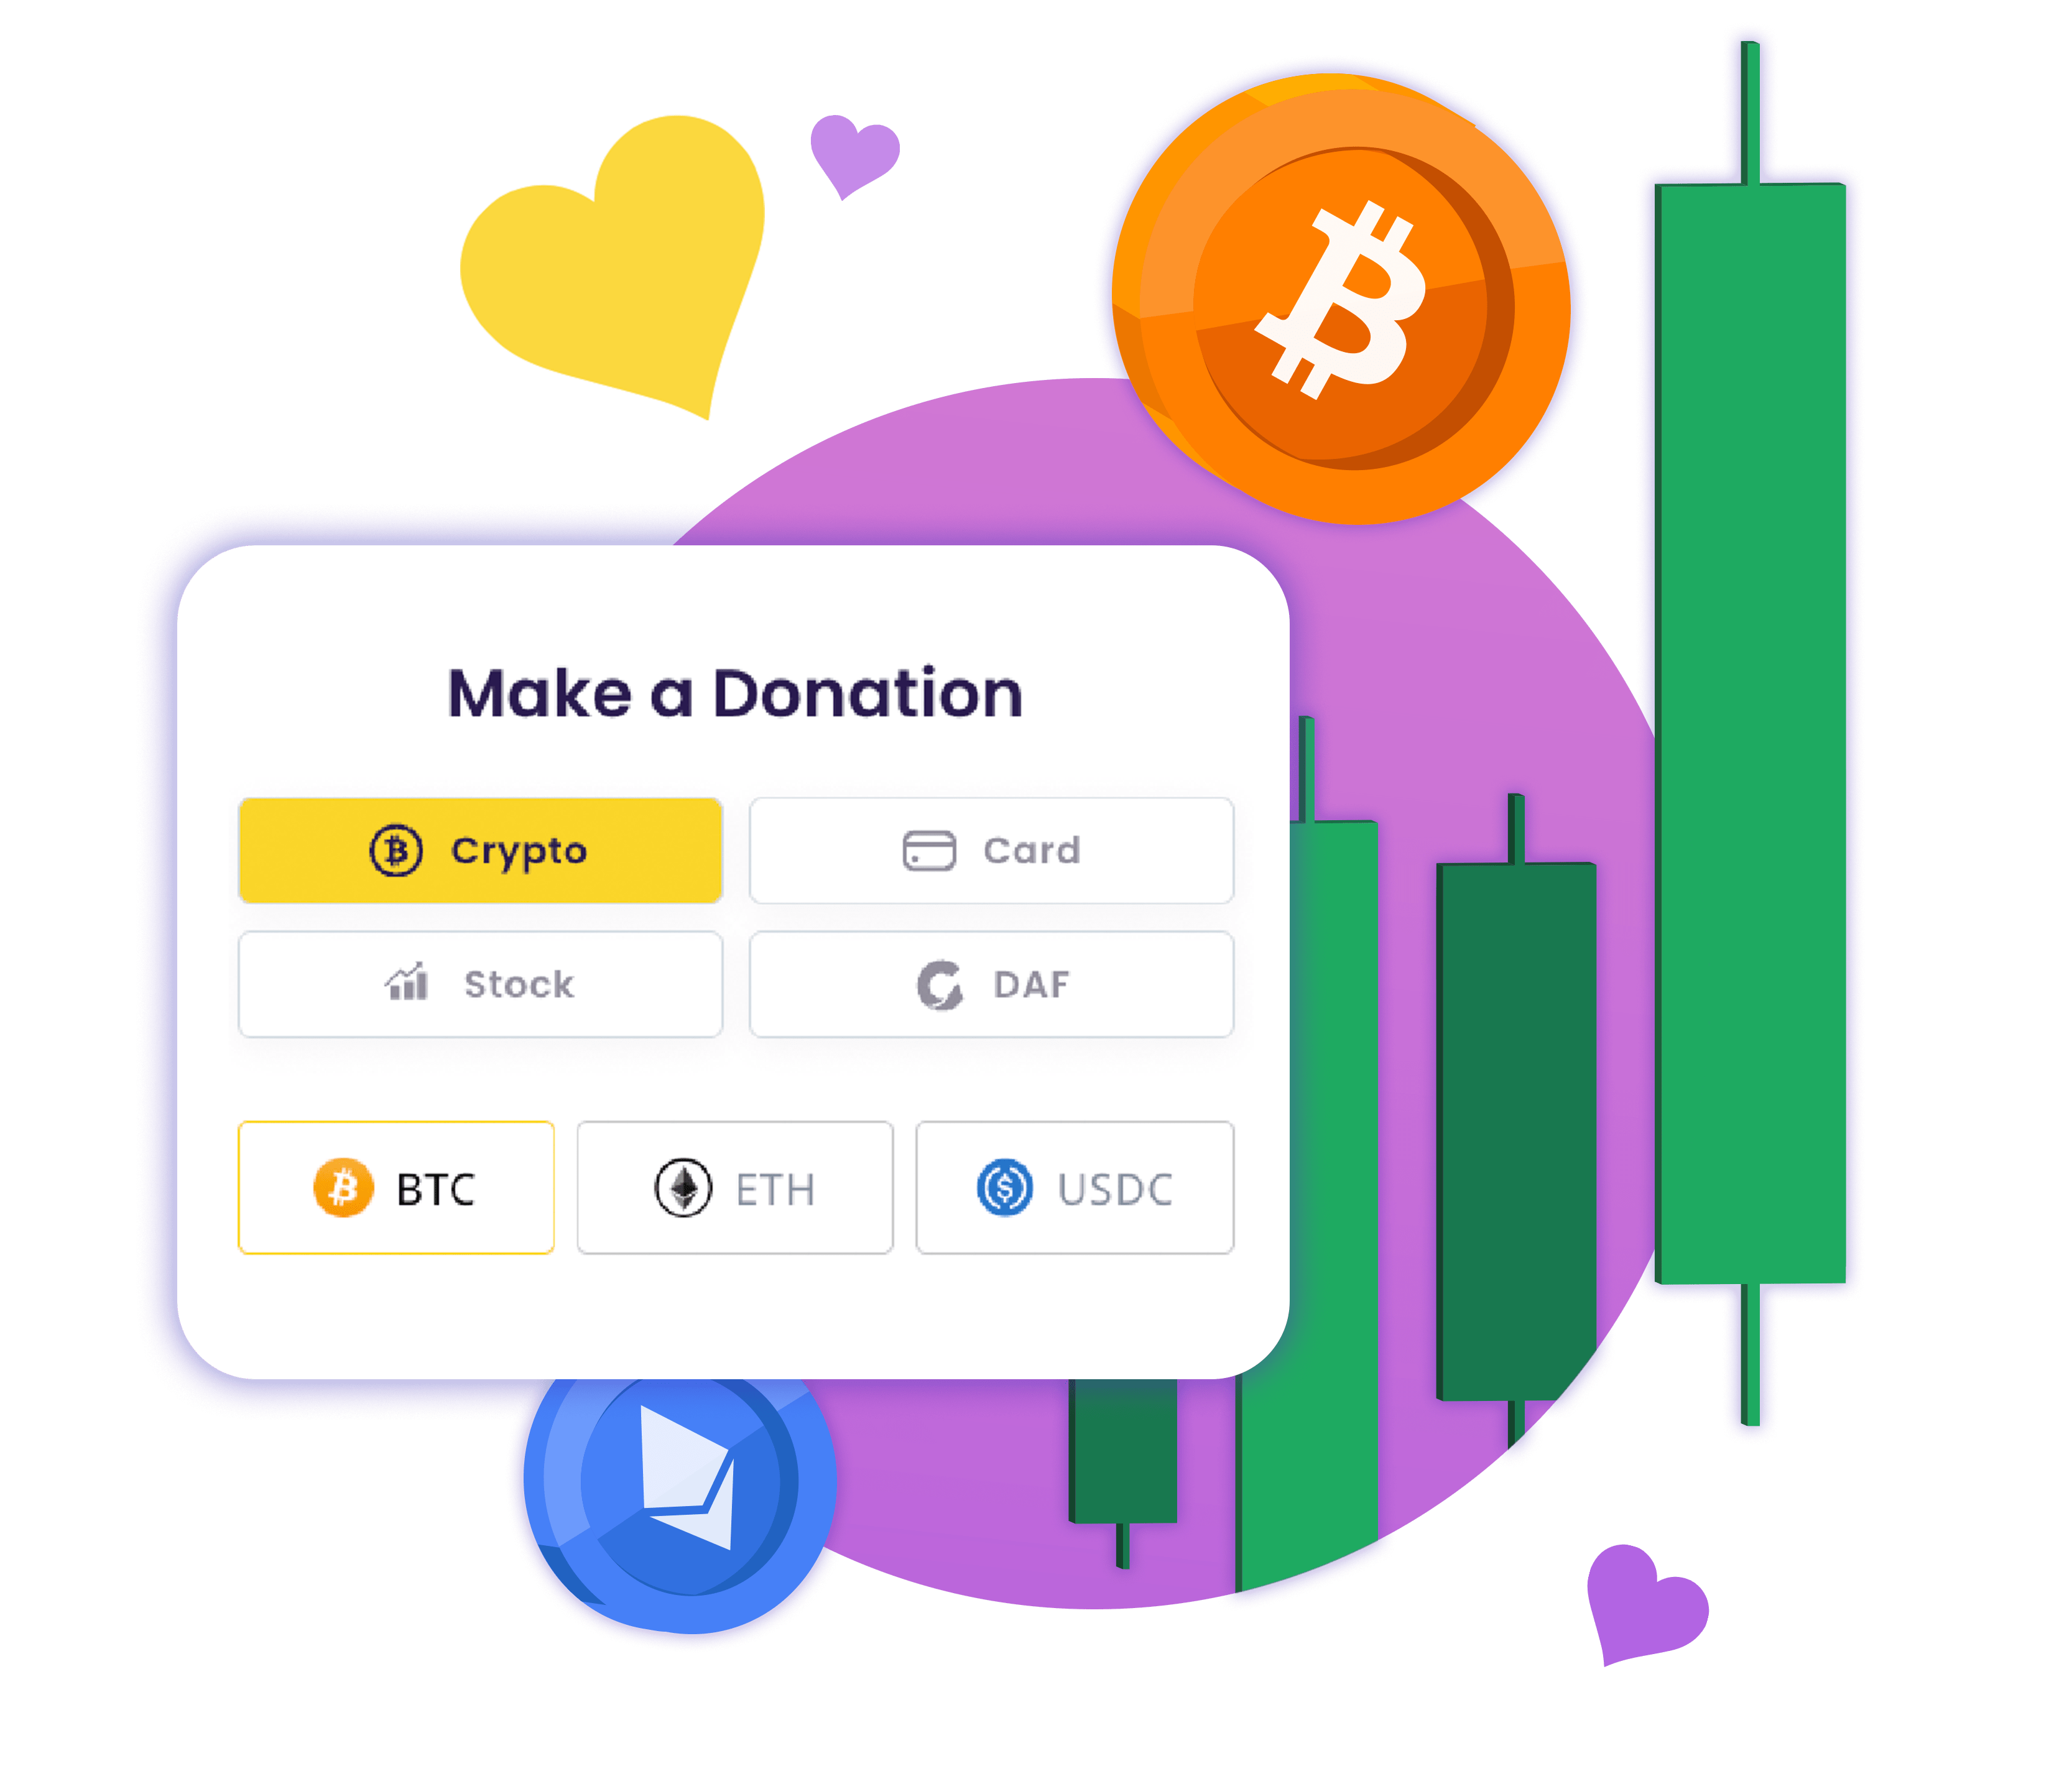 Save on your taxes by donating non-cash assets | The Giving Block